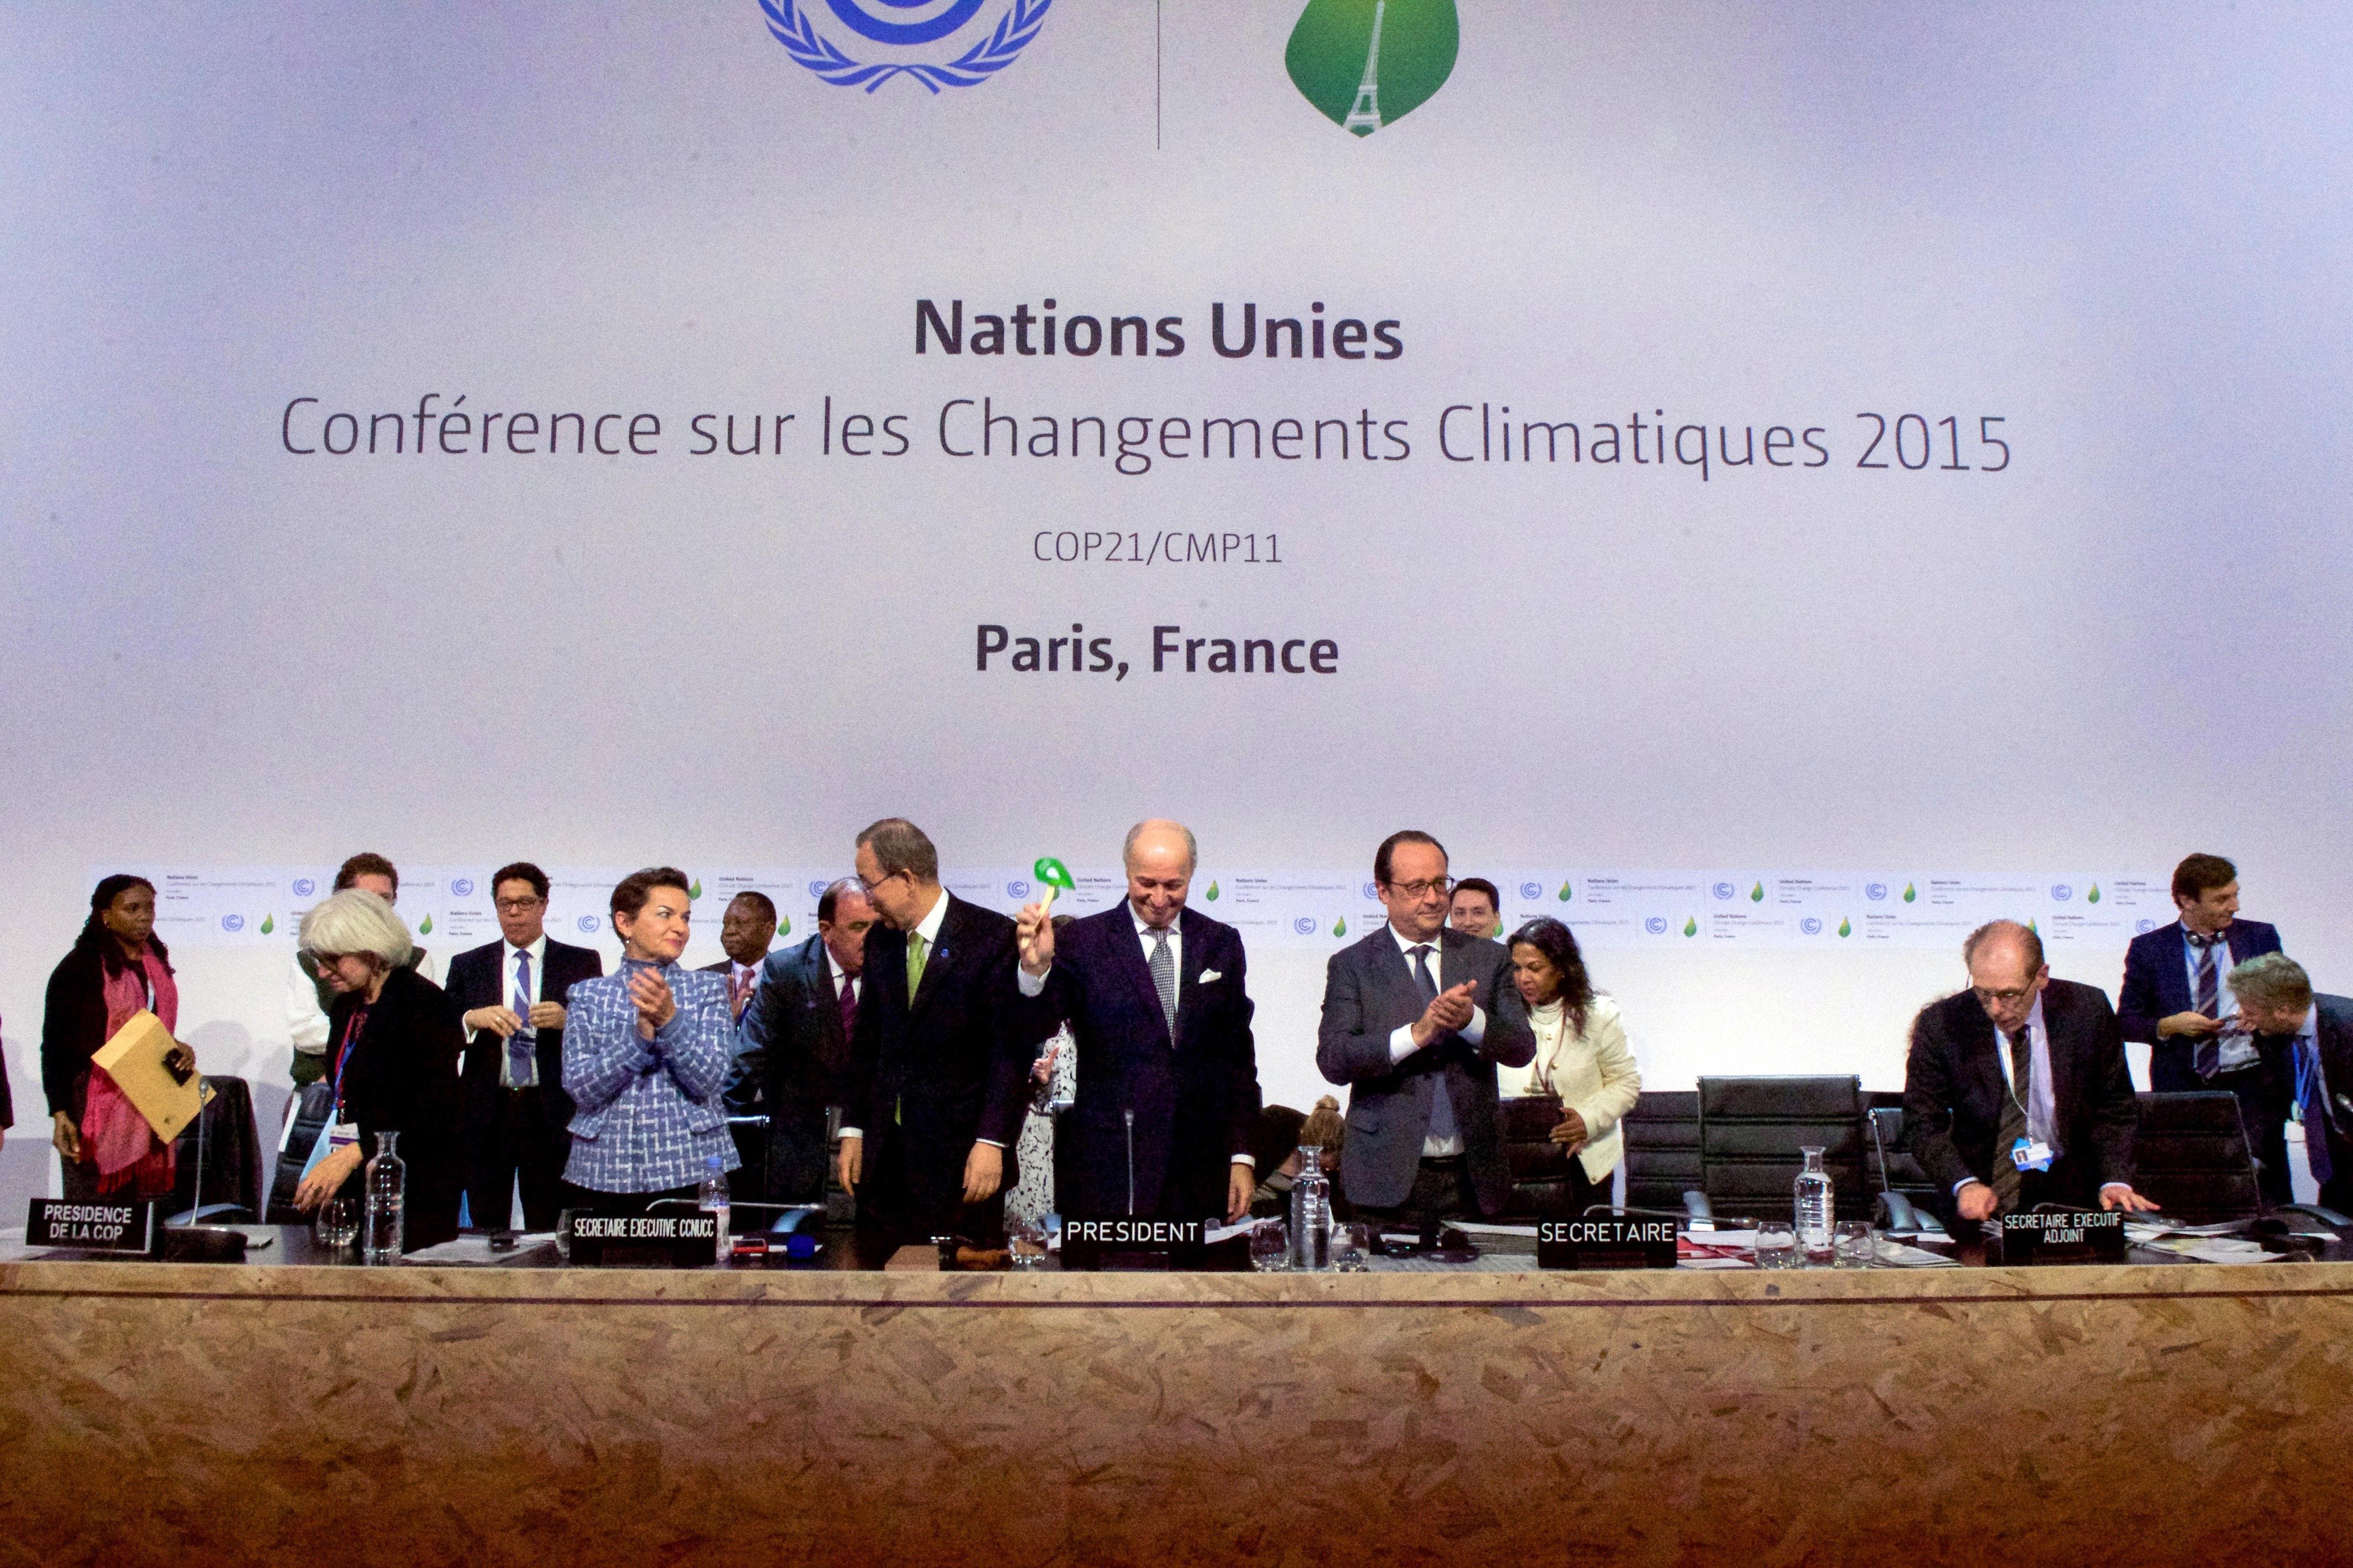 The then French Foreign Minister Laurent Fabius - President of the COP21 climate conference - bangs down the gavel after representatives of 196 countries adopted a far-reaching climate agreement during the UN Climate Change Conference at Le Bourget airport in Paris, France, 12 December 2015.